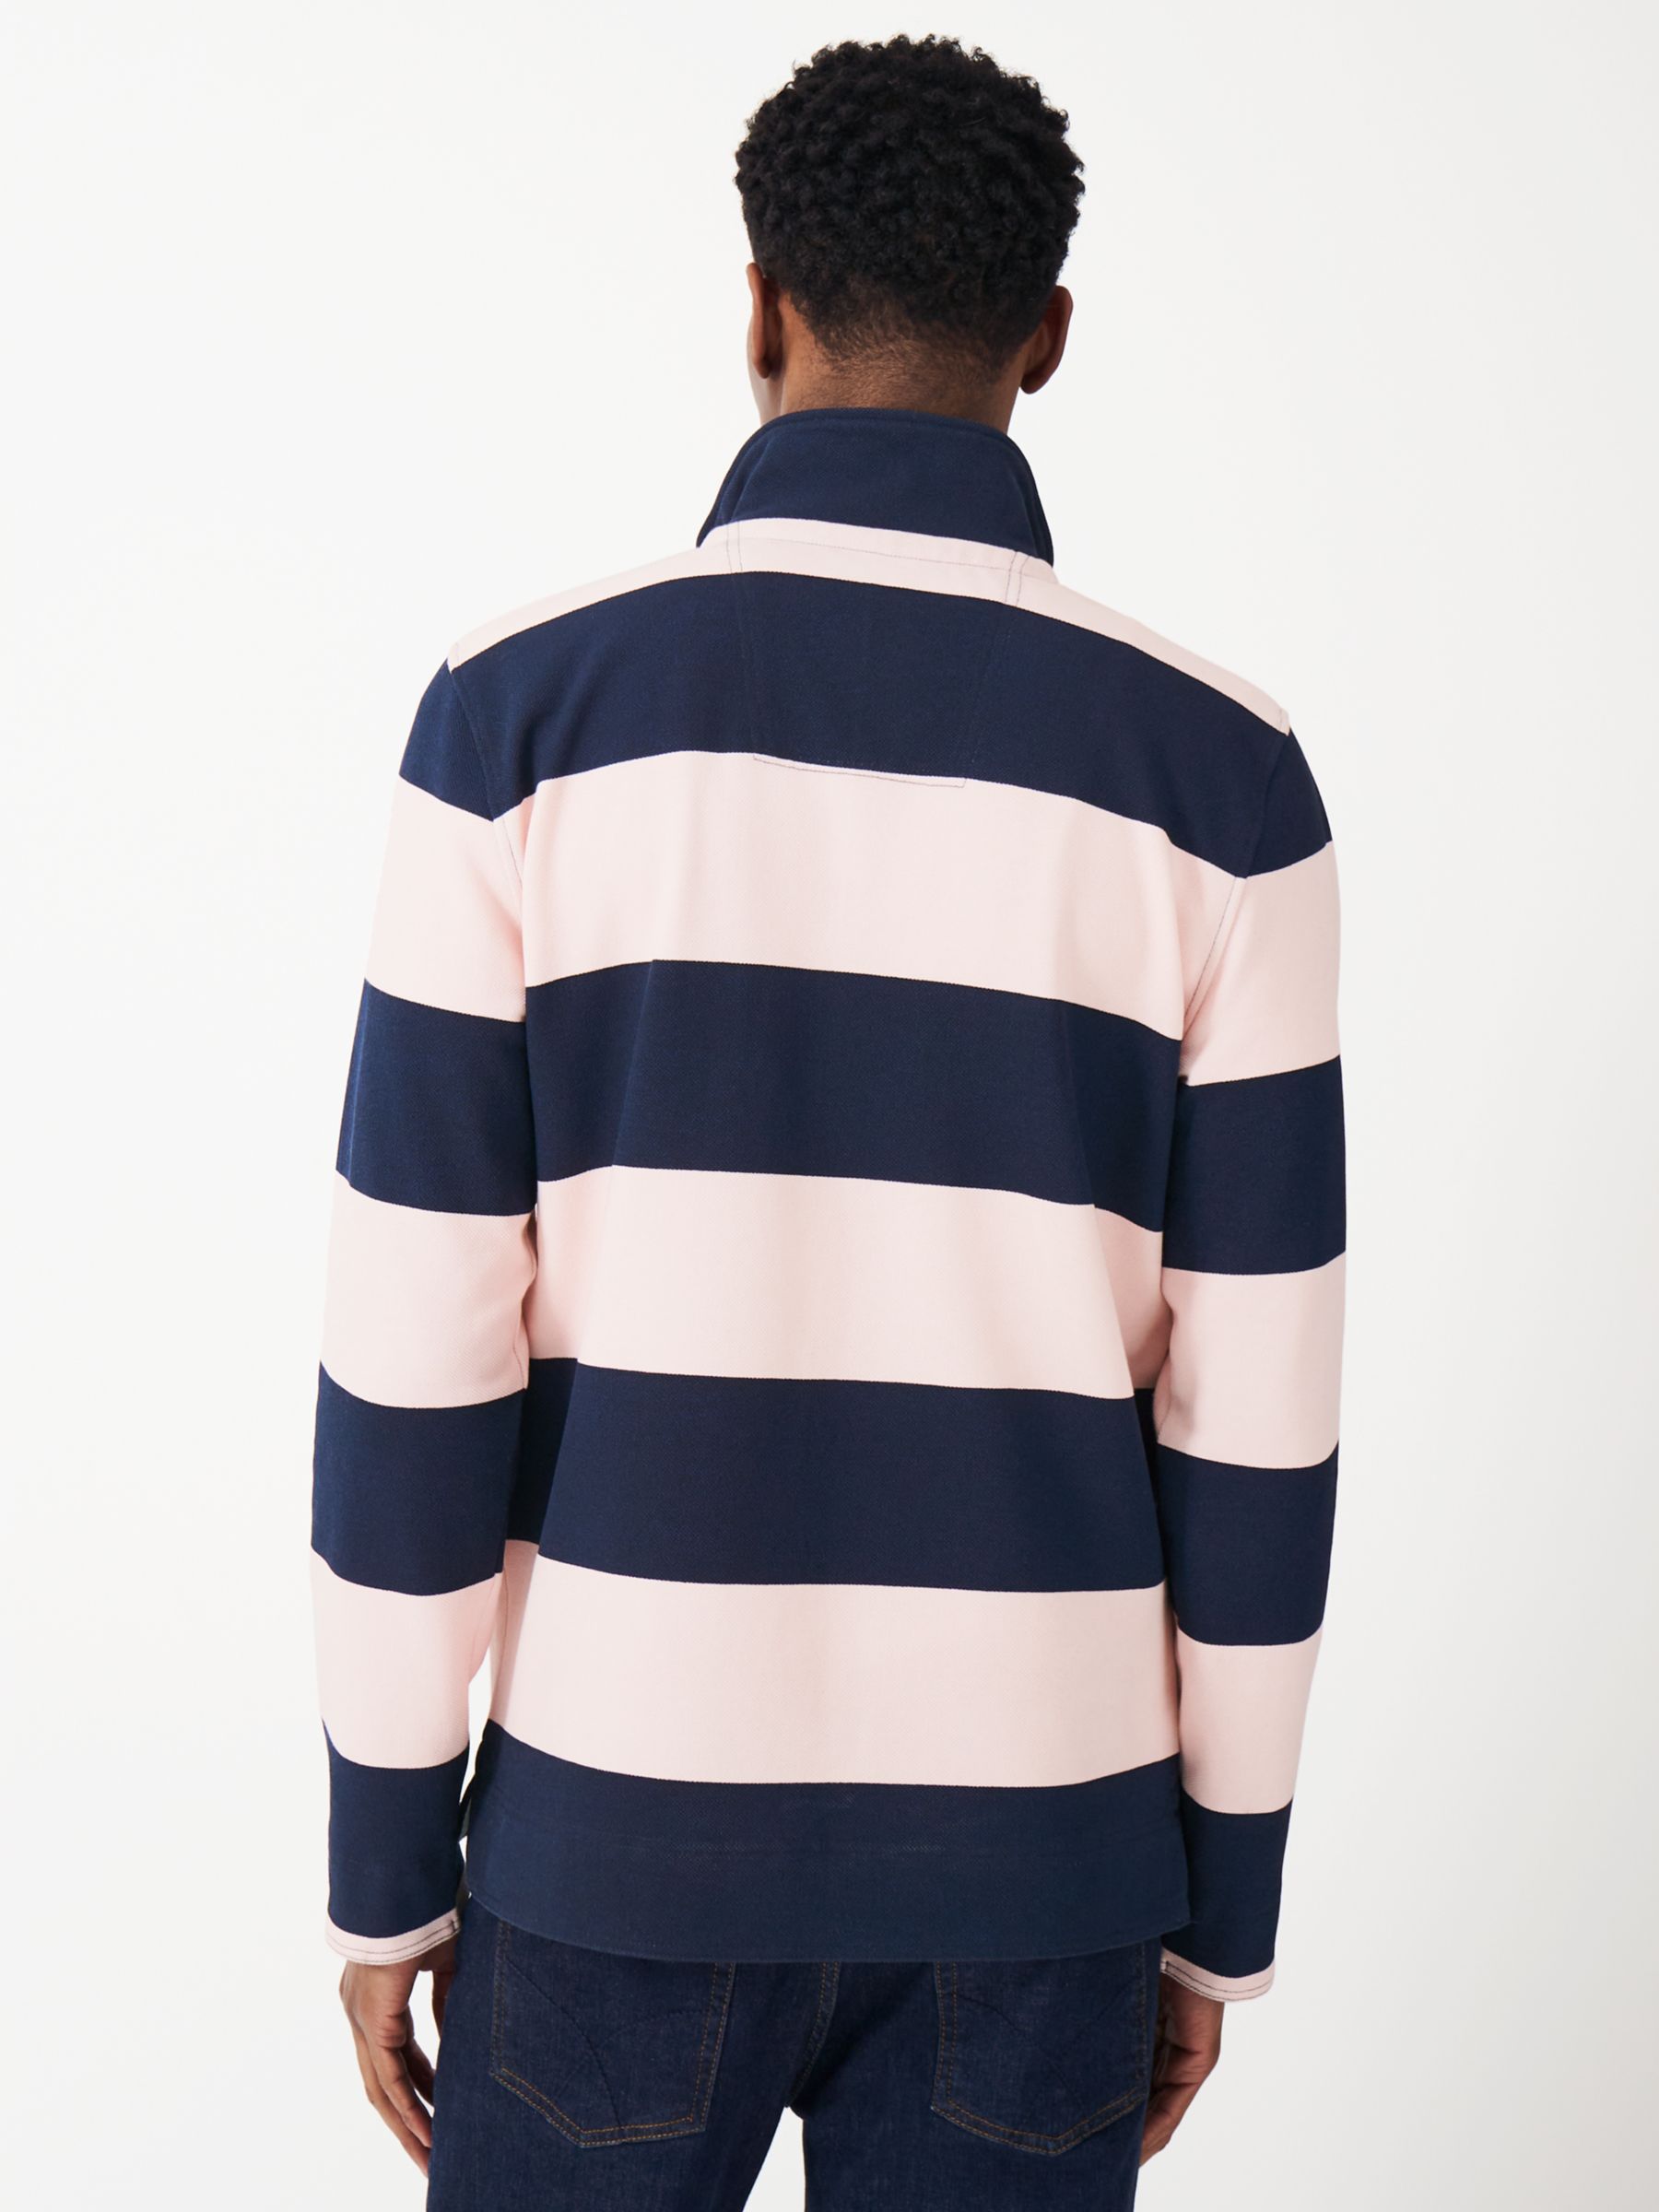 Crew Clothing Padstow Pique Stripe Jumper, Pink/Navy, L